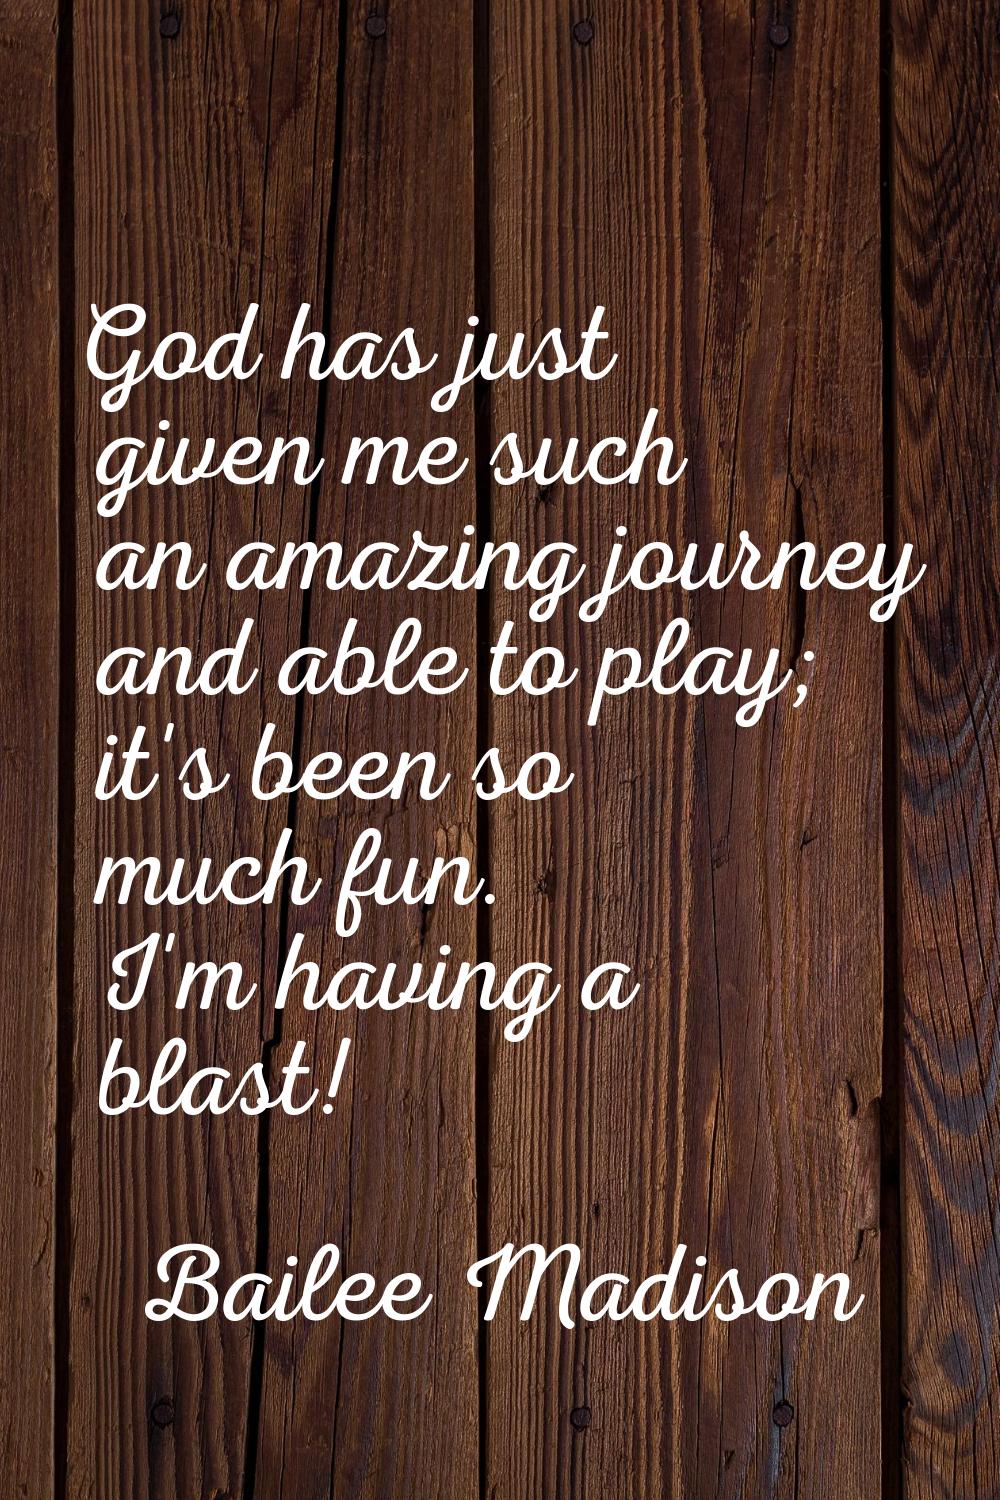 God has just given me such an amazing journey and able to play; it's been so much fun. I'm having a